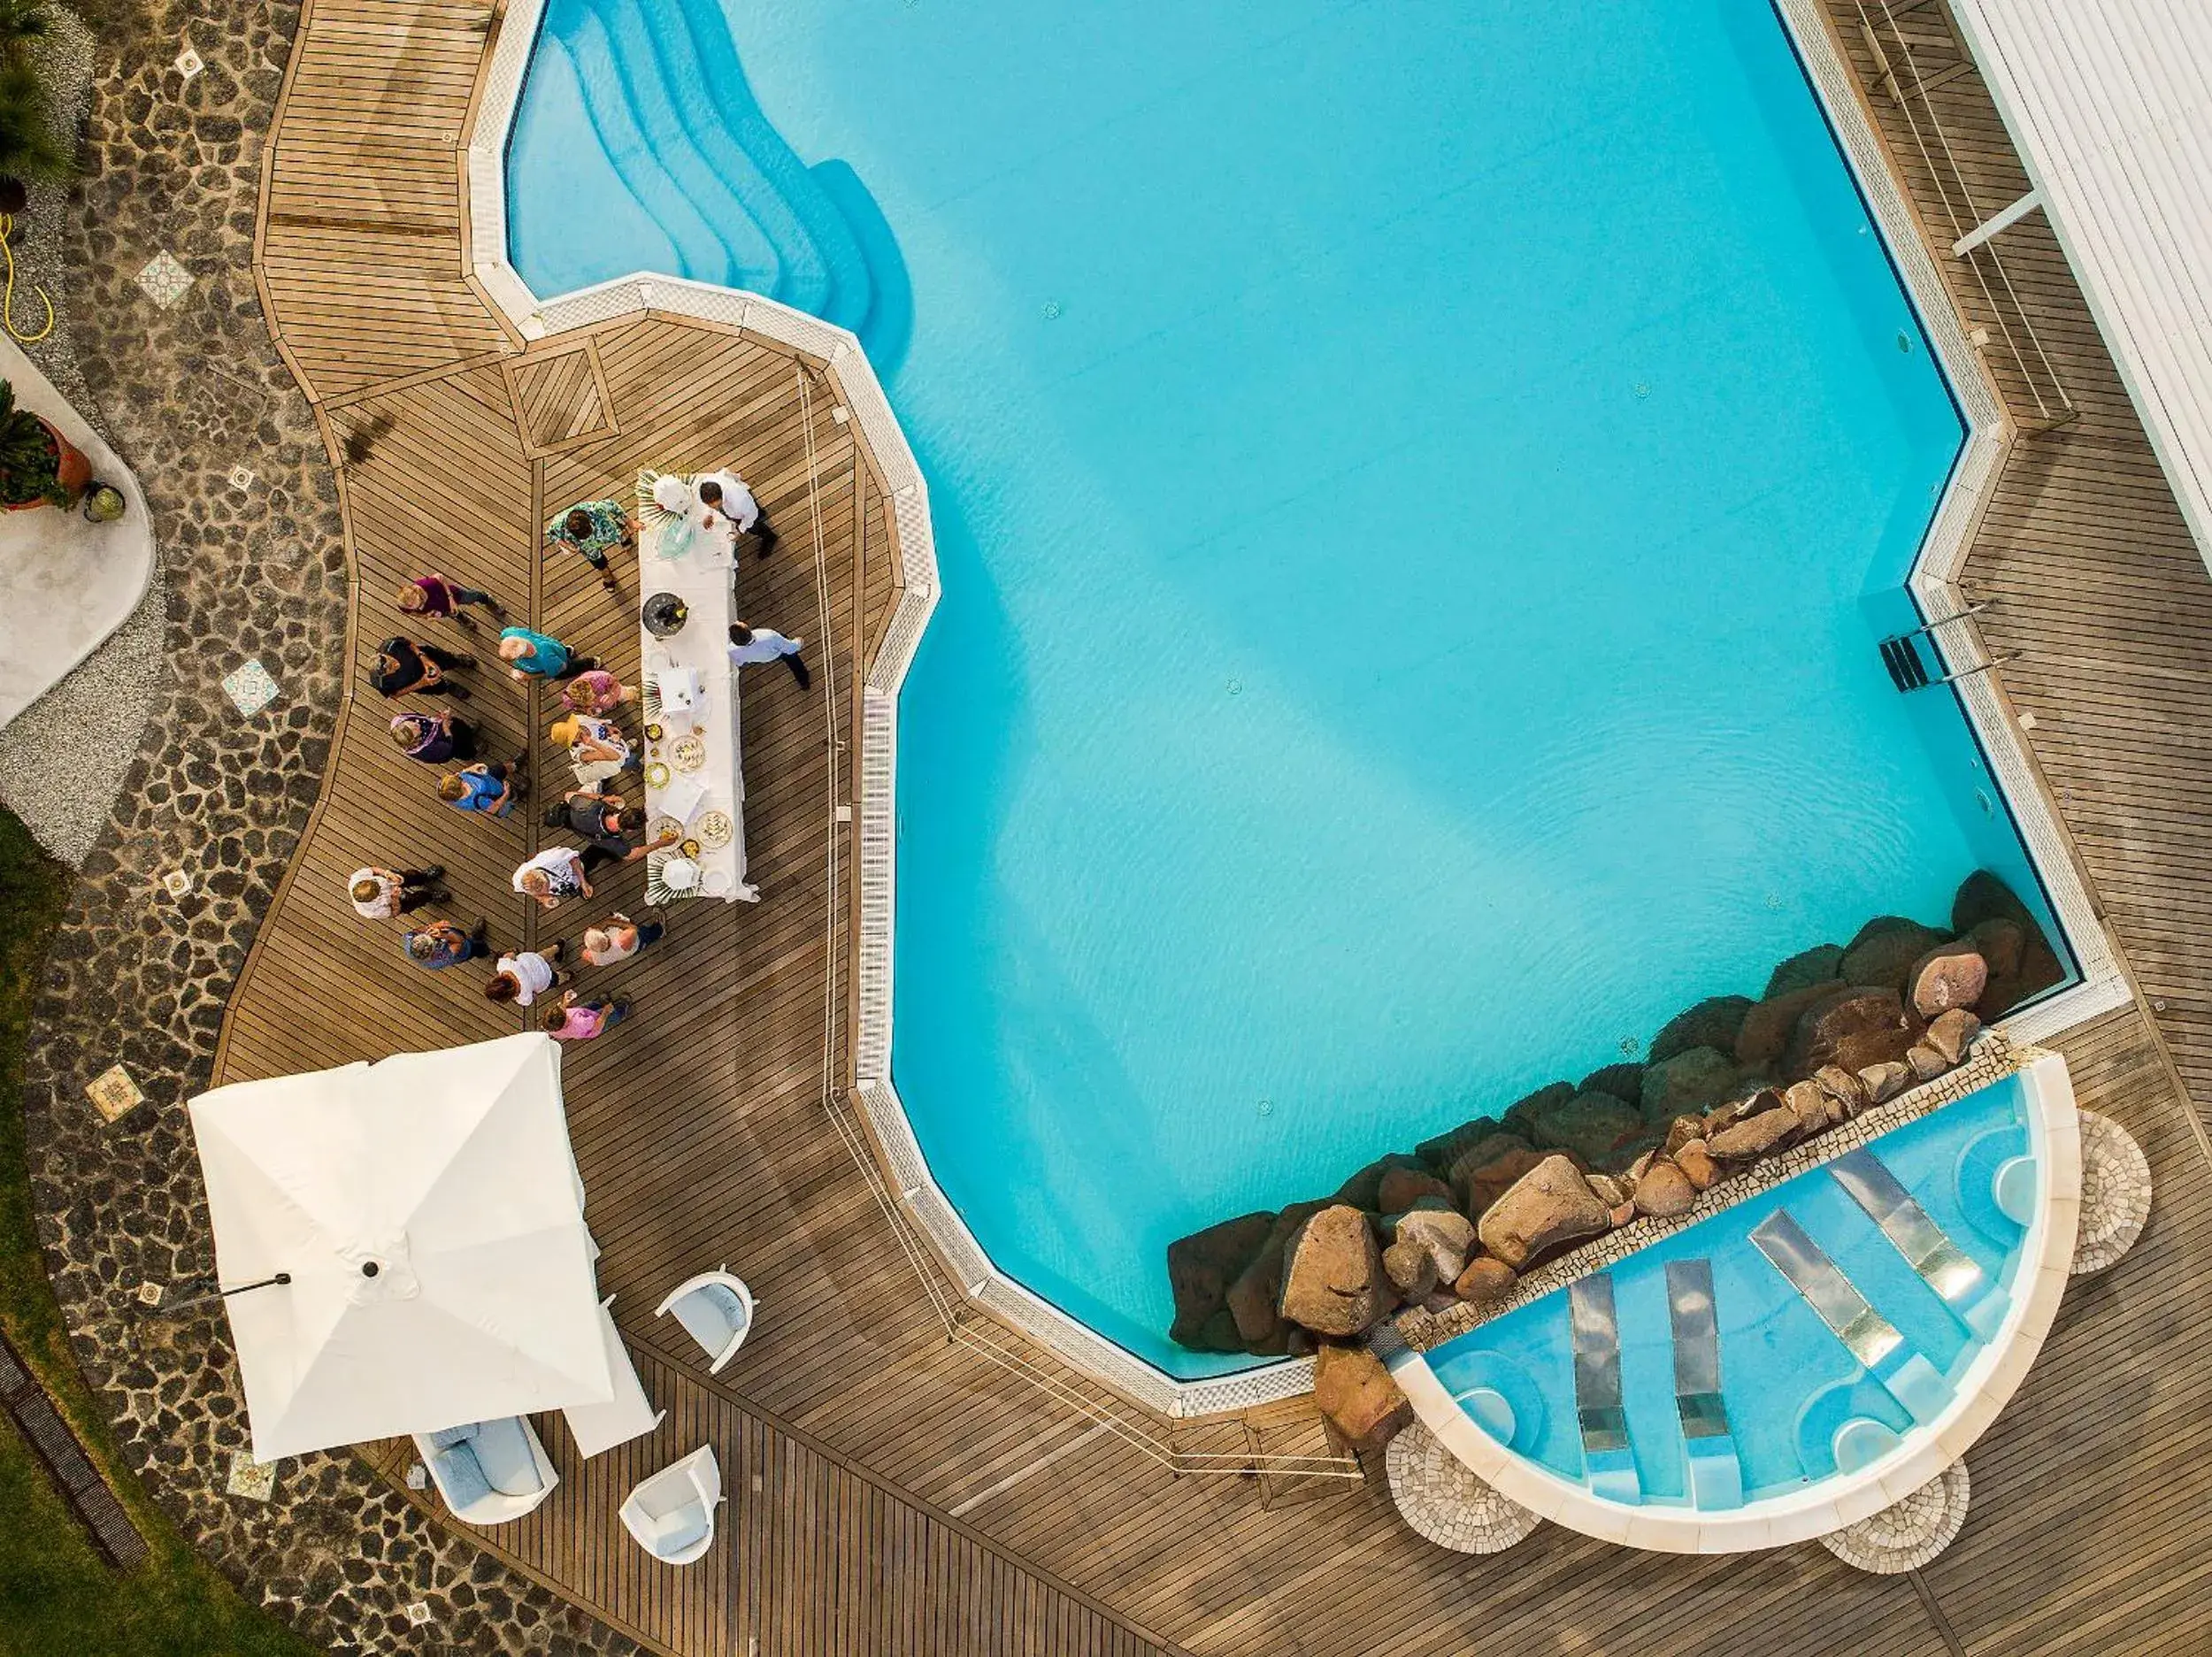 Bird's eye view, Pool View in Hotel Orsa Maggiore